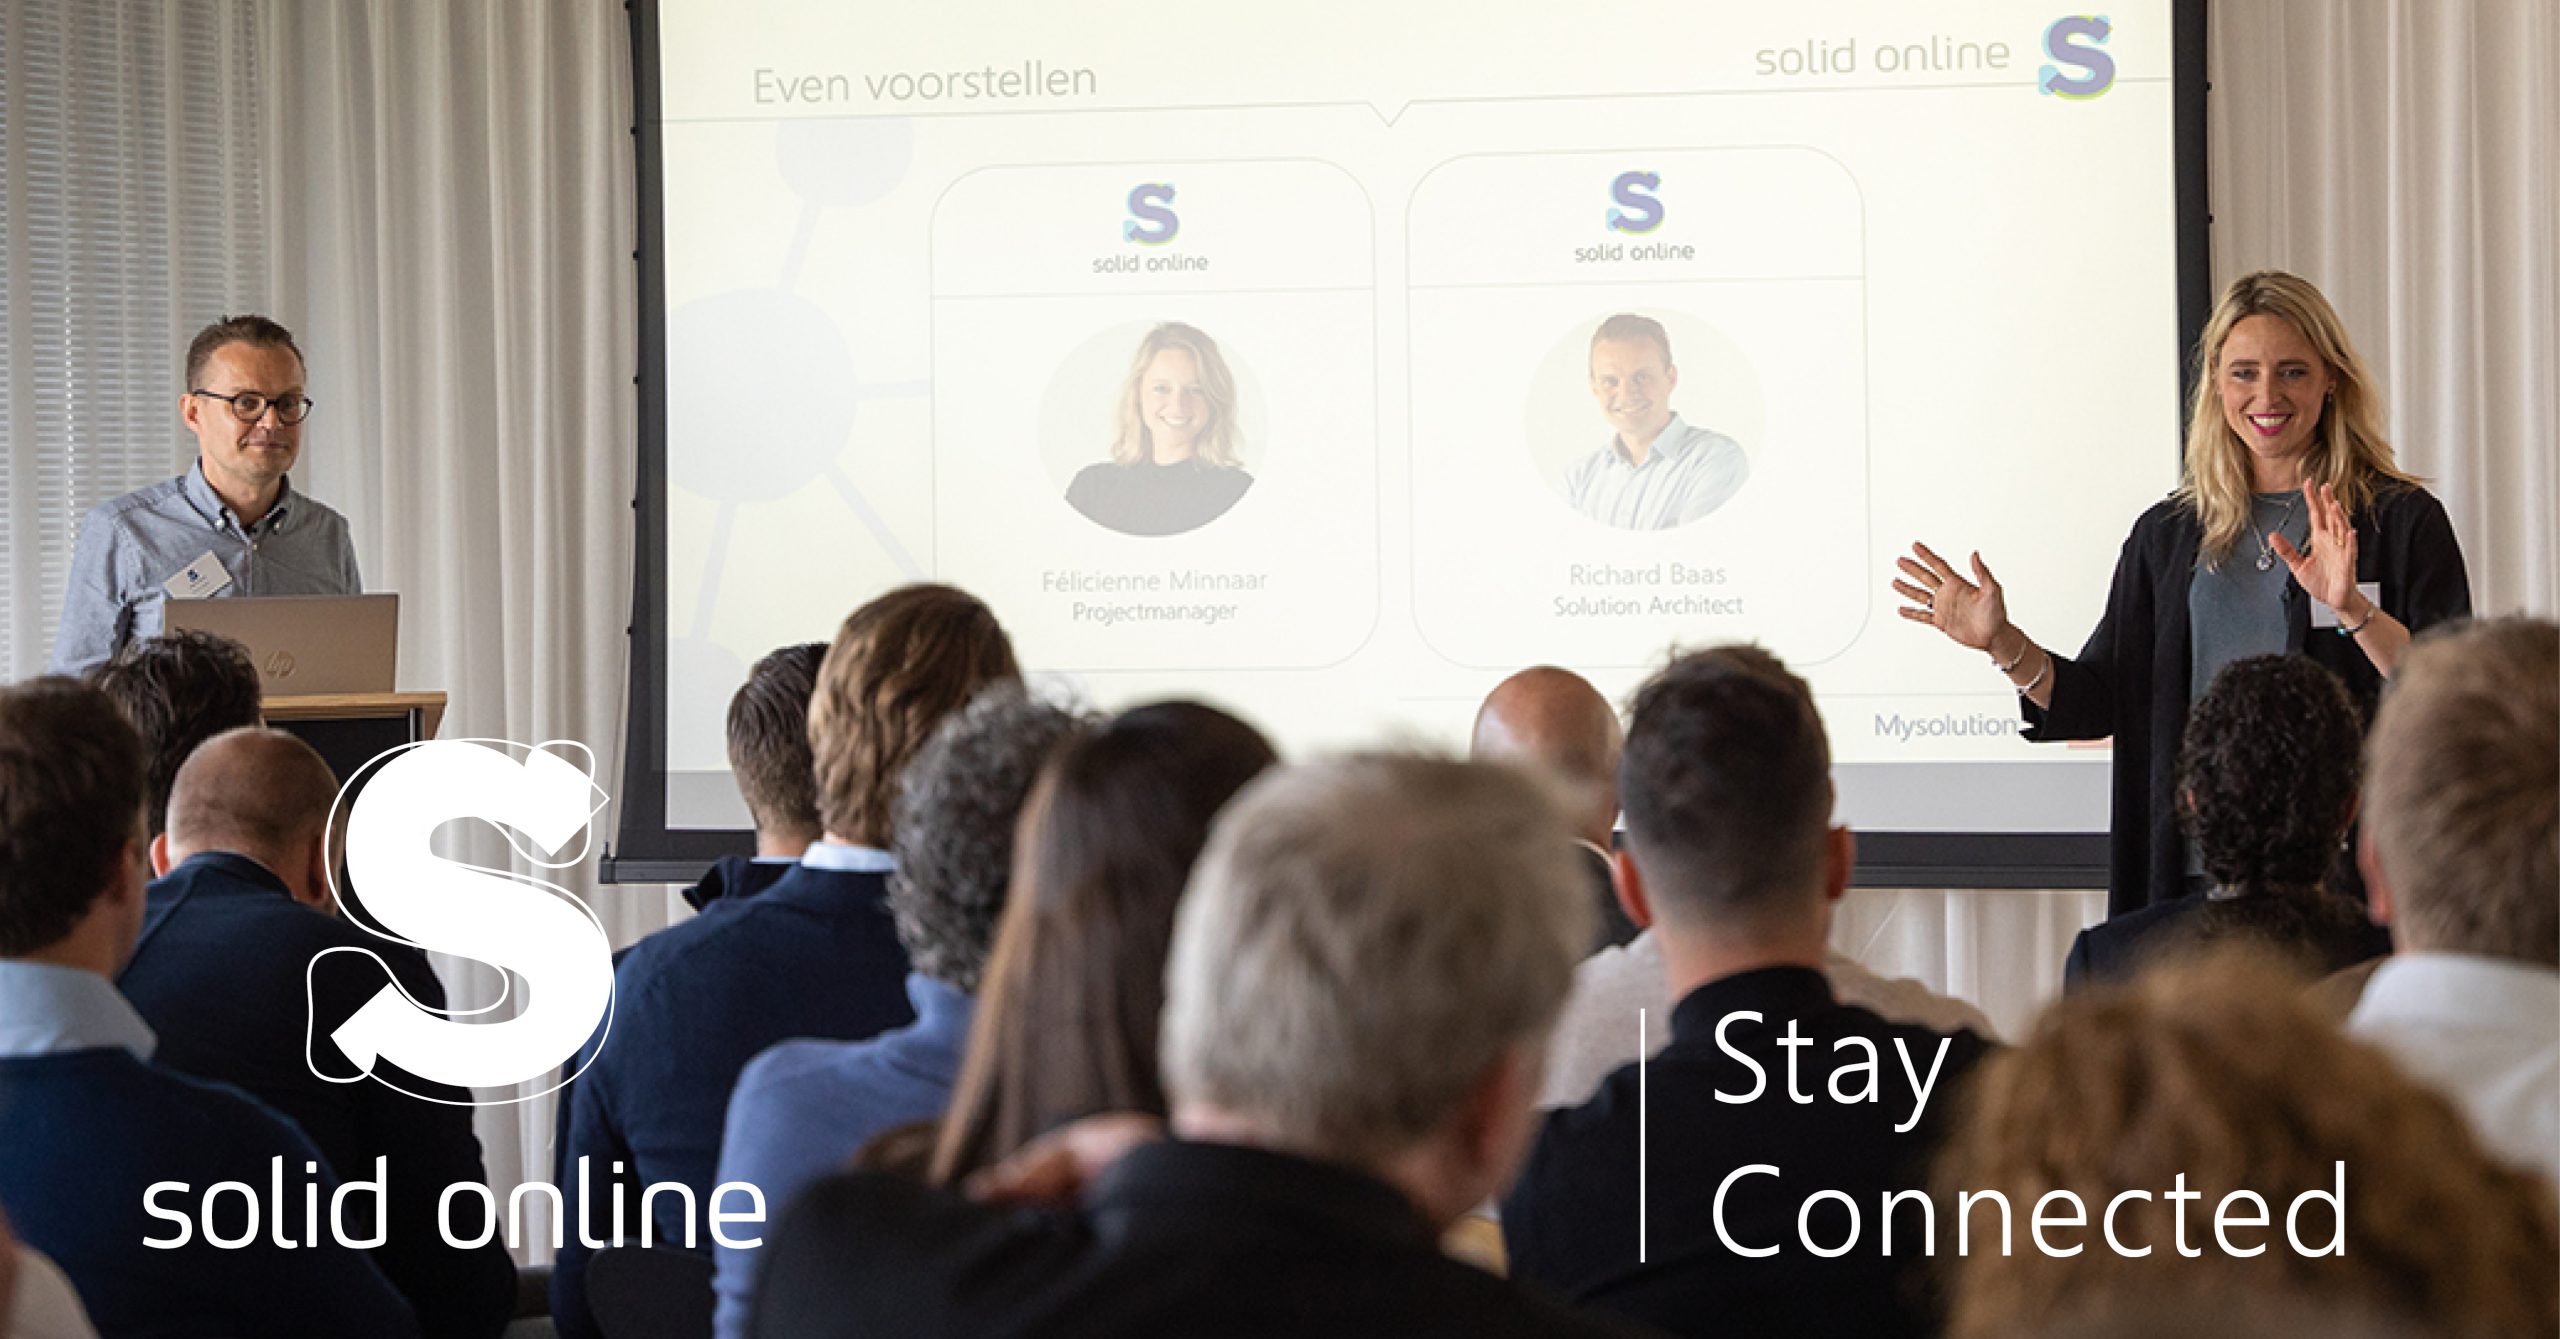 Stay Connected: Successful Solid Online Event Celebrates Collaborations